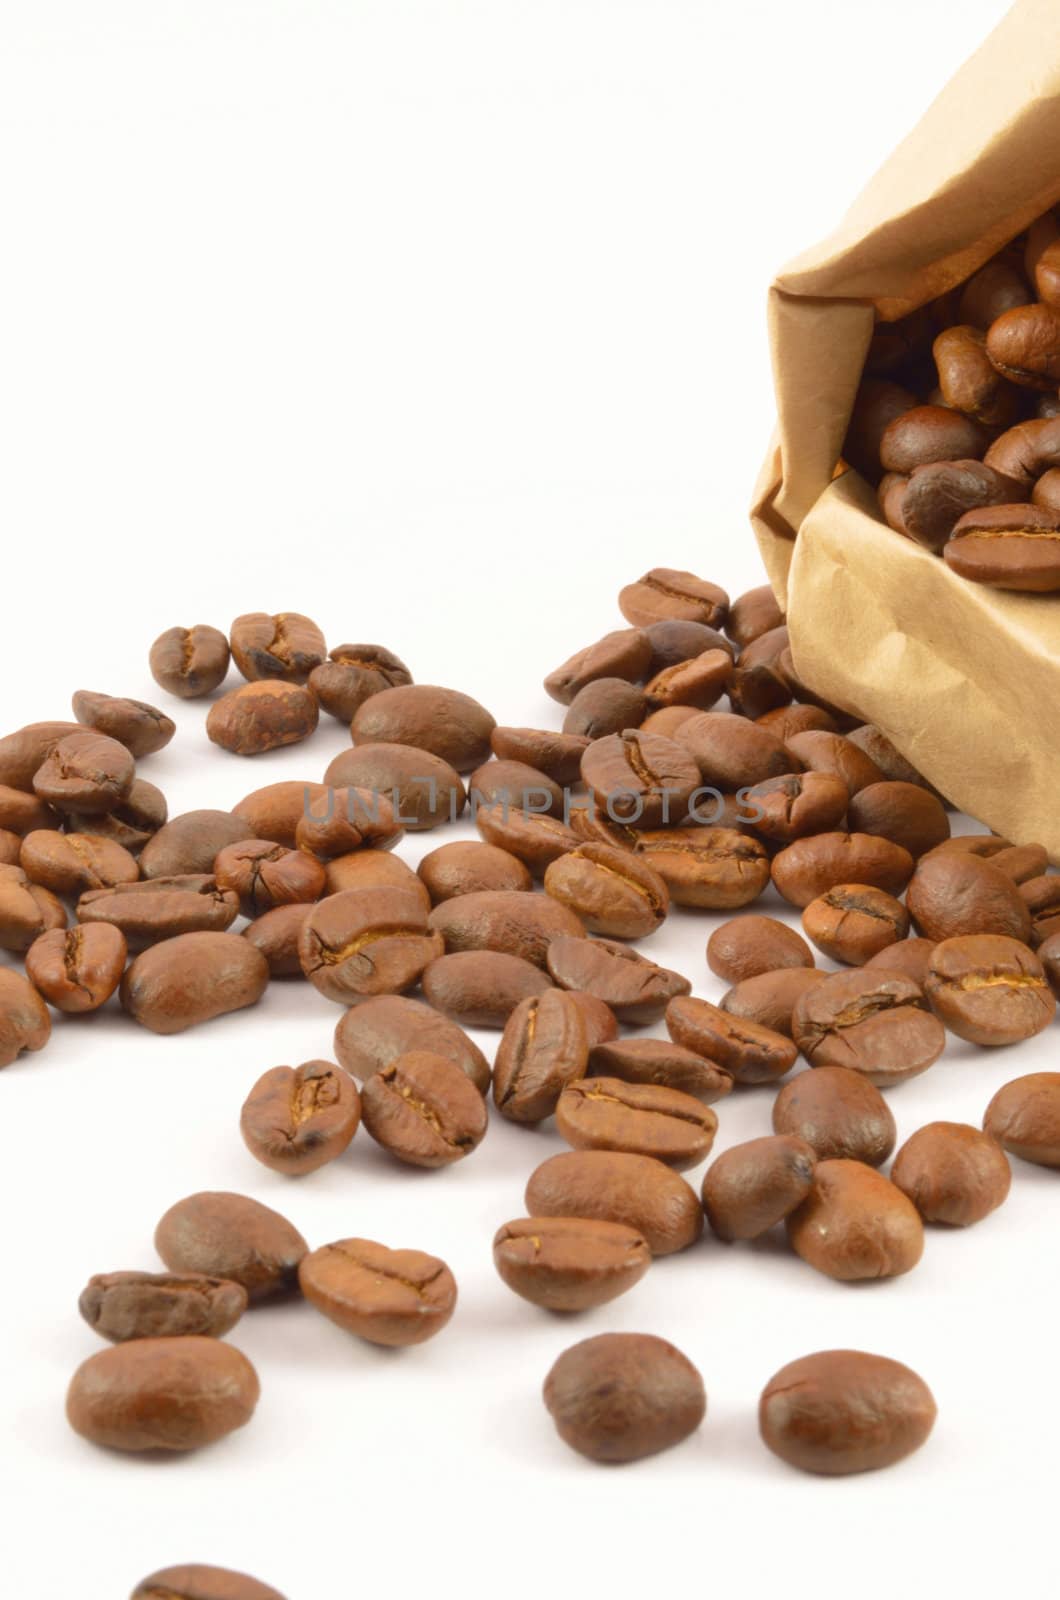 Coffee grains by subos